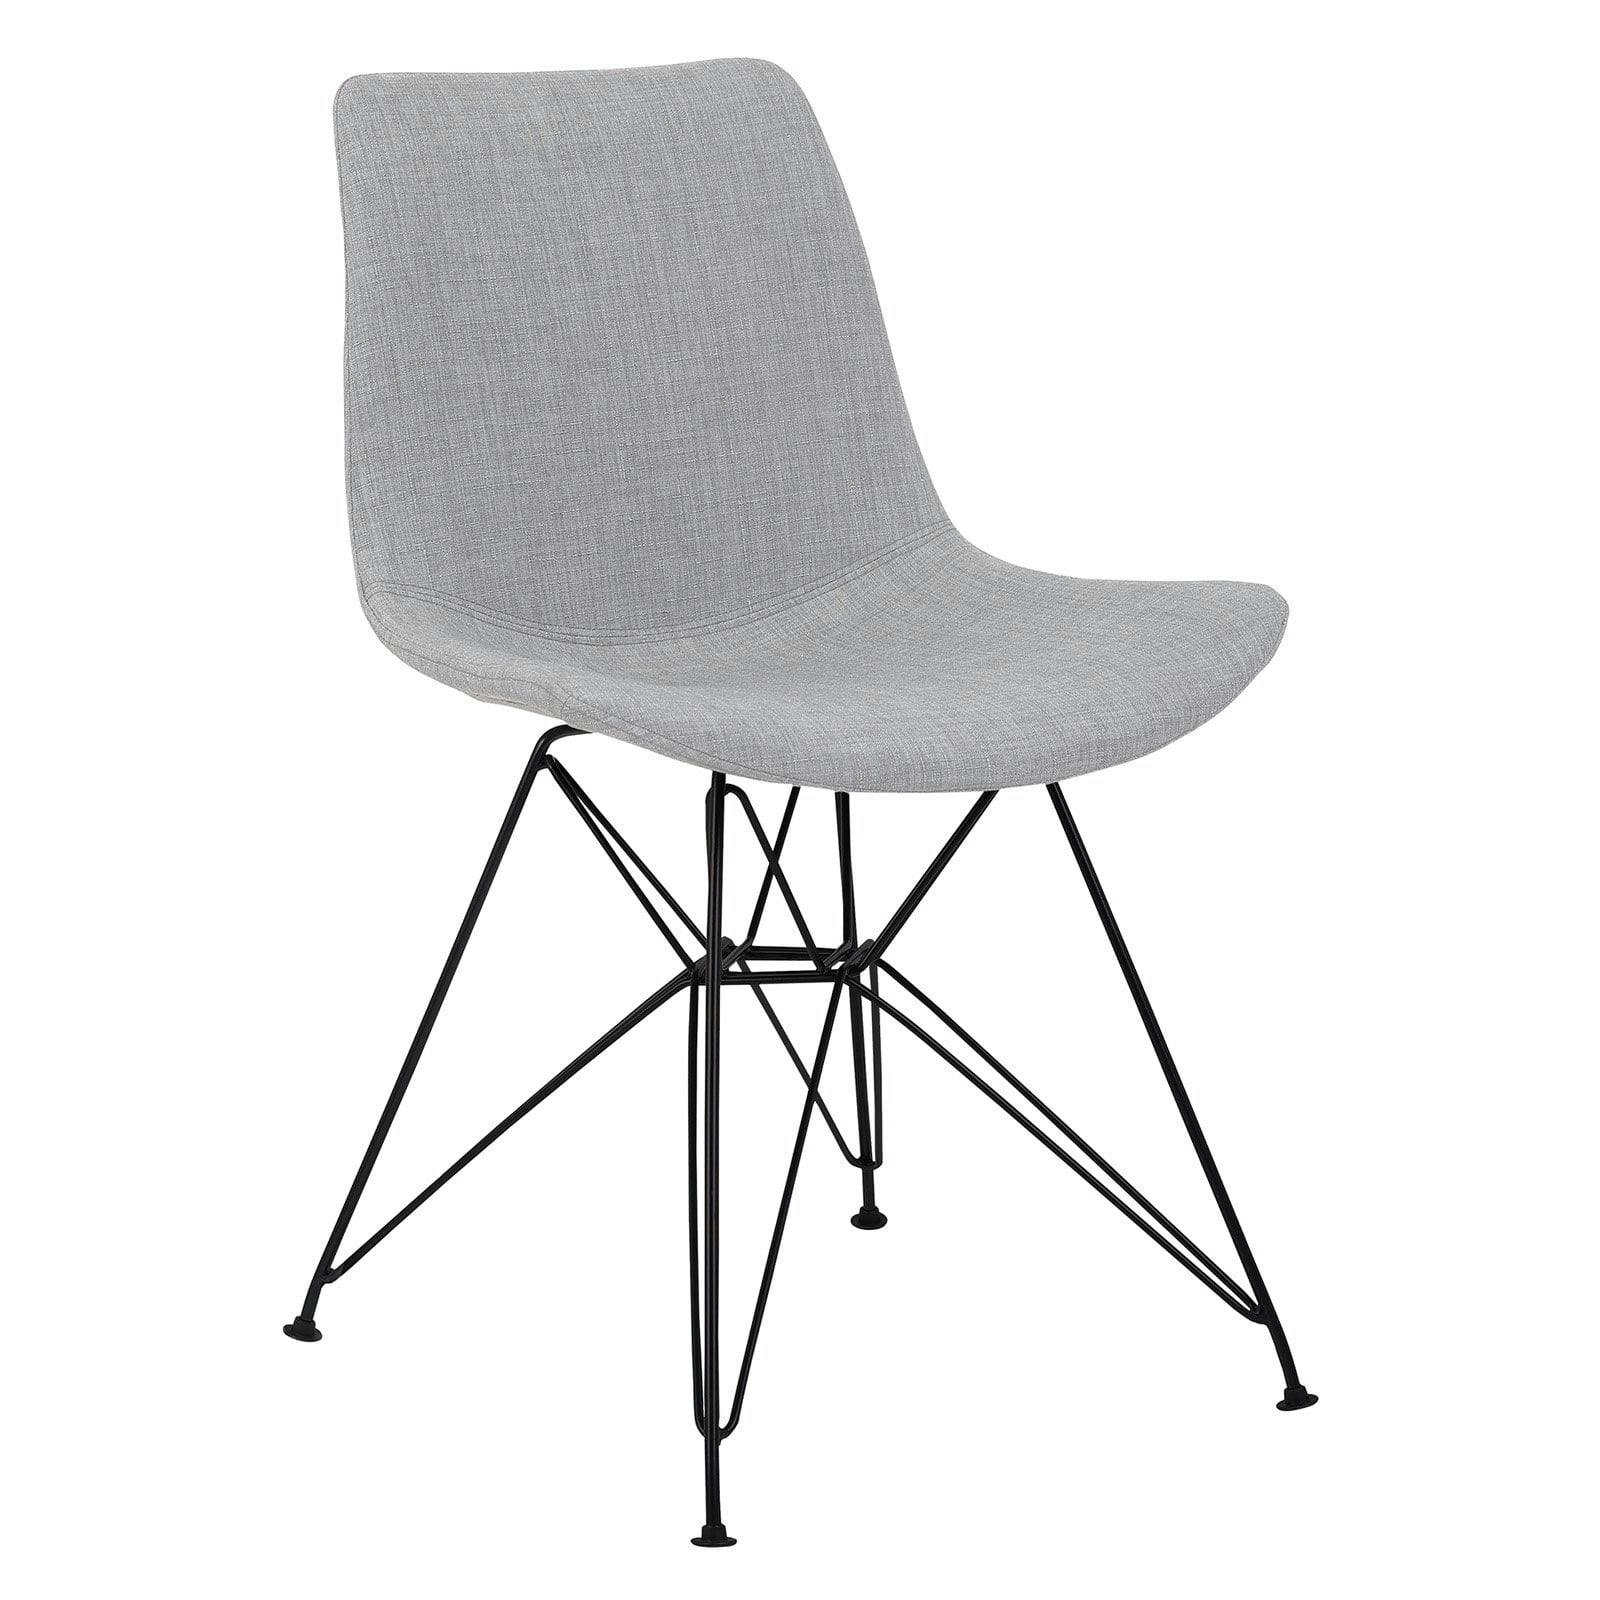 High-Back Gray Faux Leather Upholstered Side Chair with Metal Frame